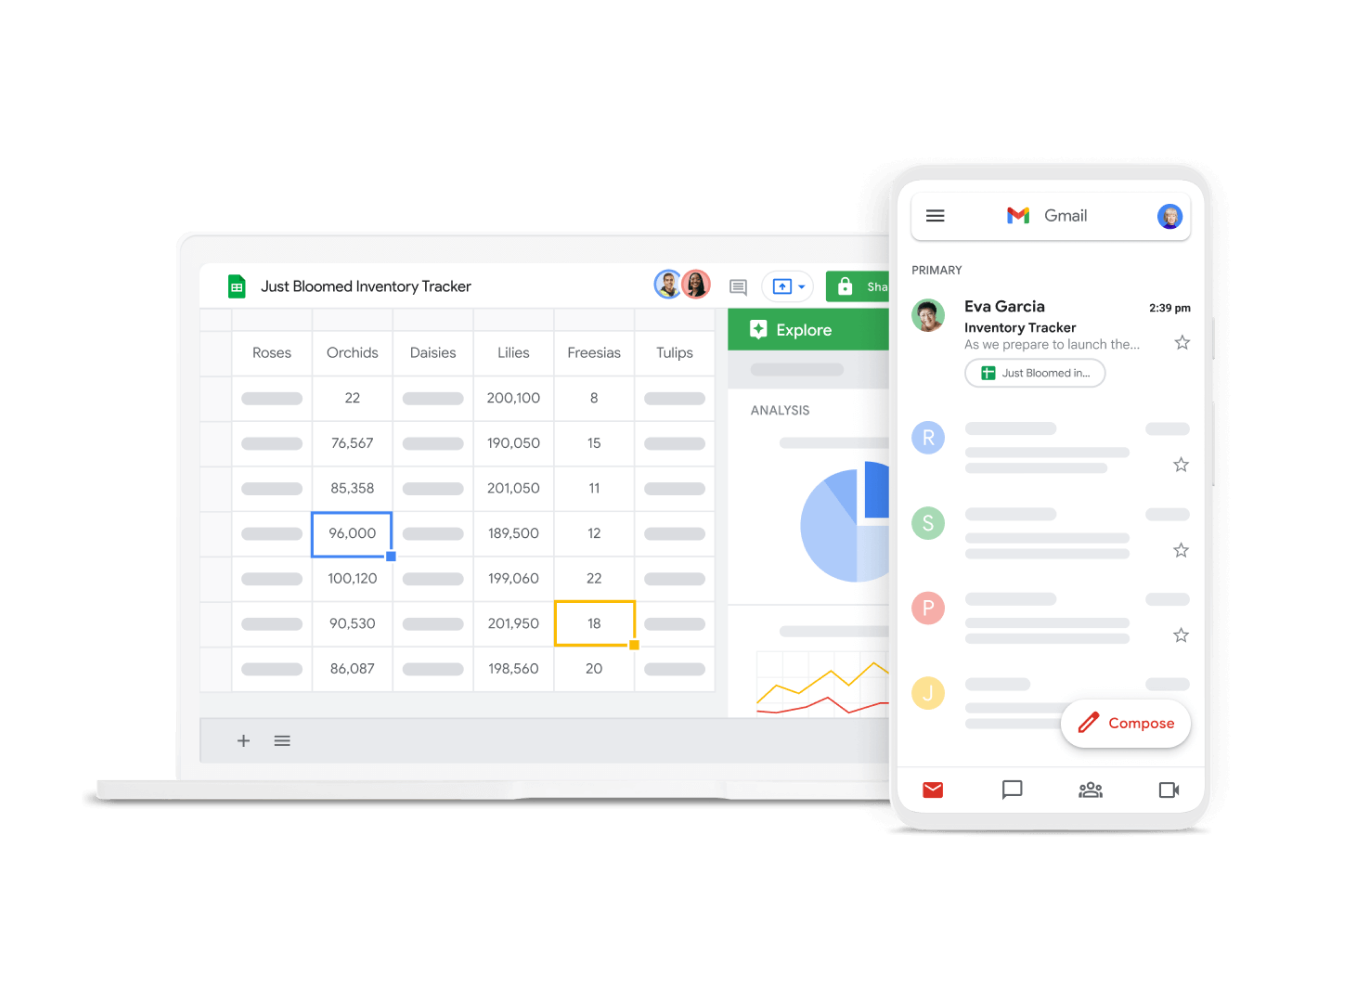 Google Sheets and Gmail UI in desktop and mobile designed to work across devices 